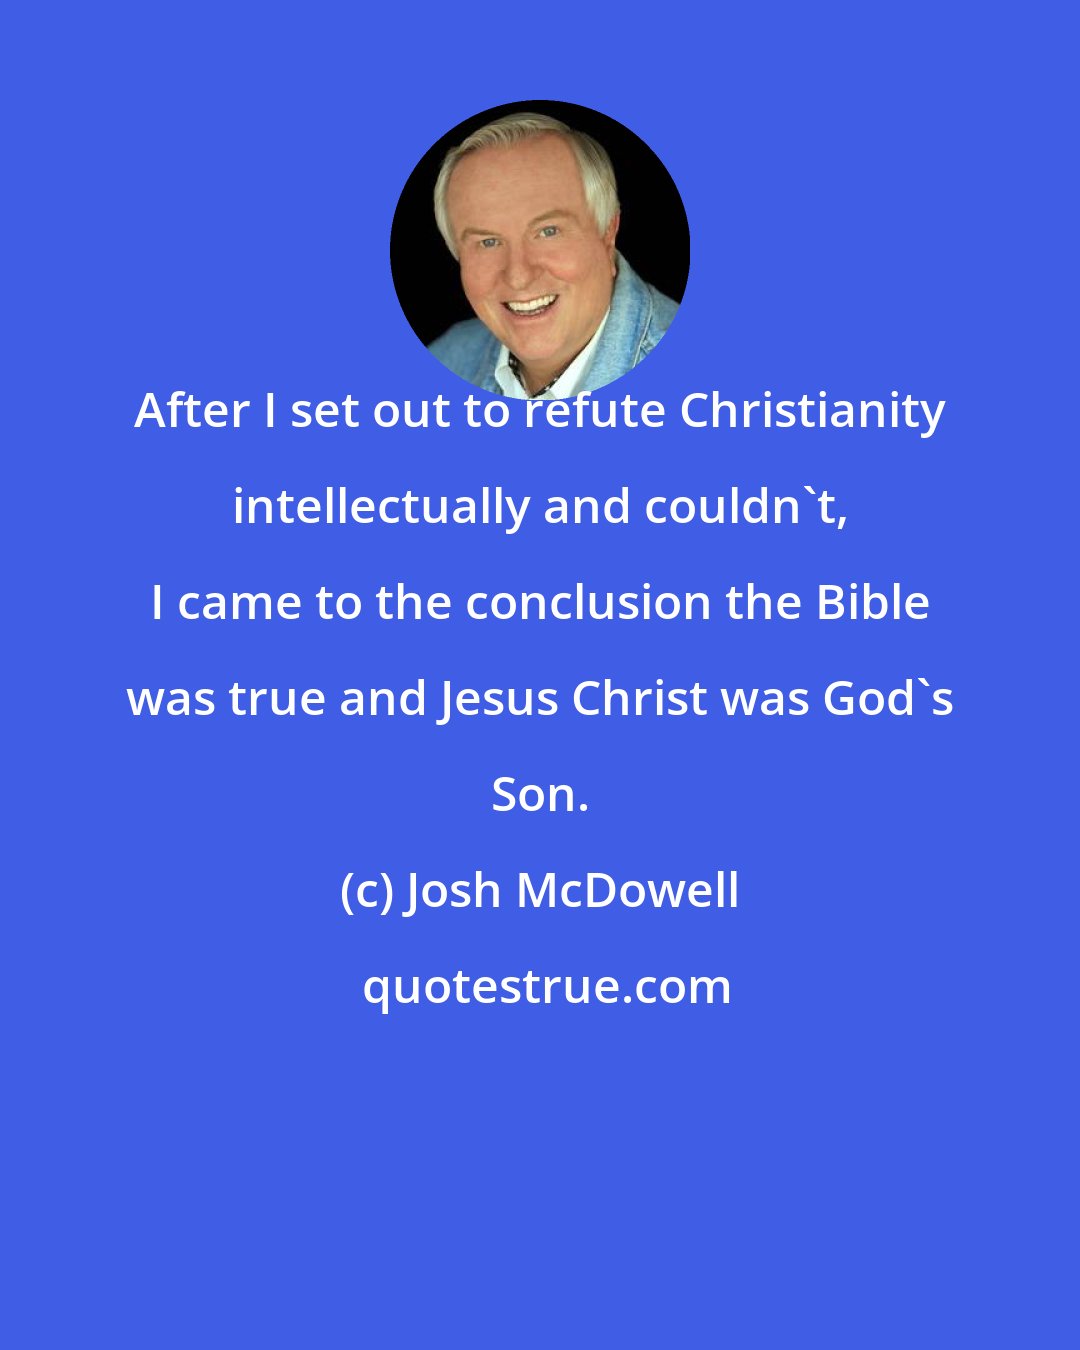 Josh McDowell: After I set out to refute Christianity intellectually and couldn't, I came to the conclusion the Bible was true and Jesus Christ was God's Son.